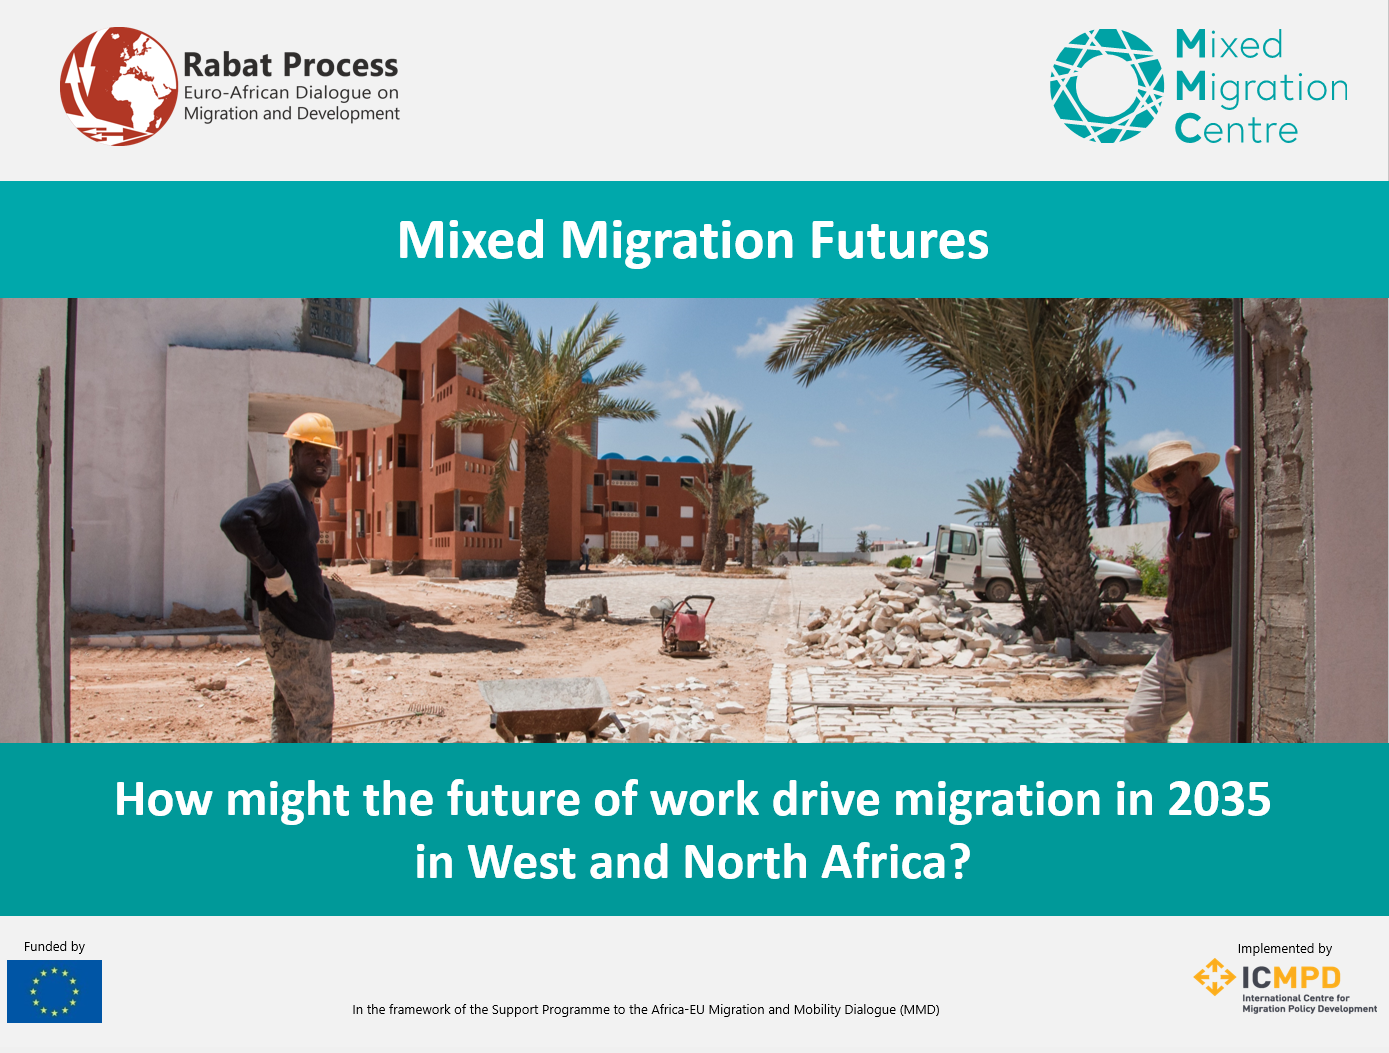 Upcoming: “The future of work“ – Mixed Migration Futures Workshop